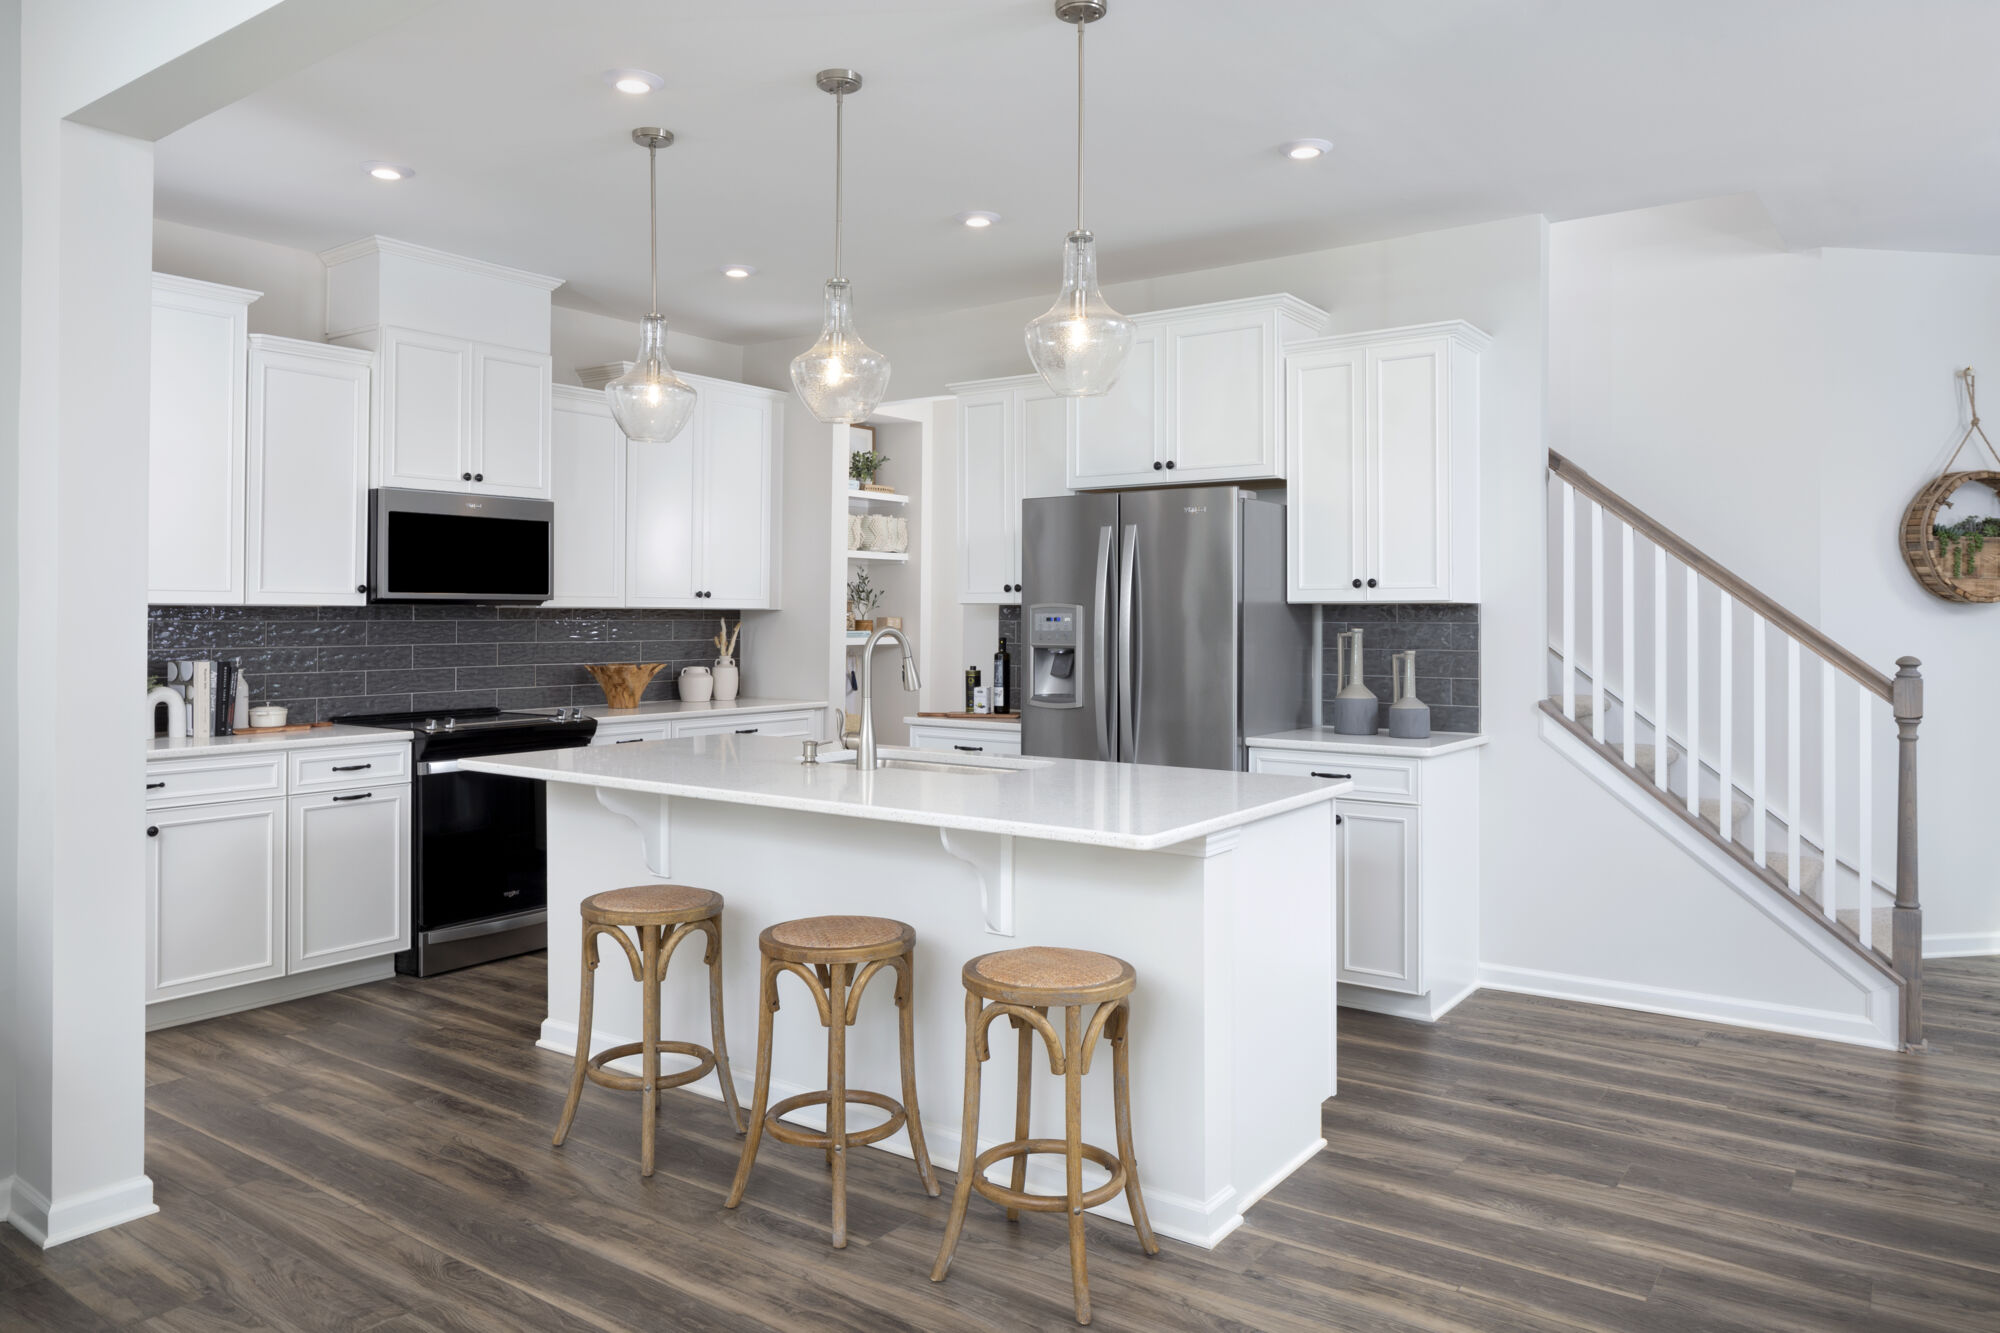 L-Shaped Kitchen with pendant light, refrigerator, white cabinets, range and wood flooring